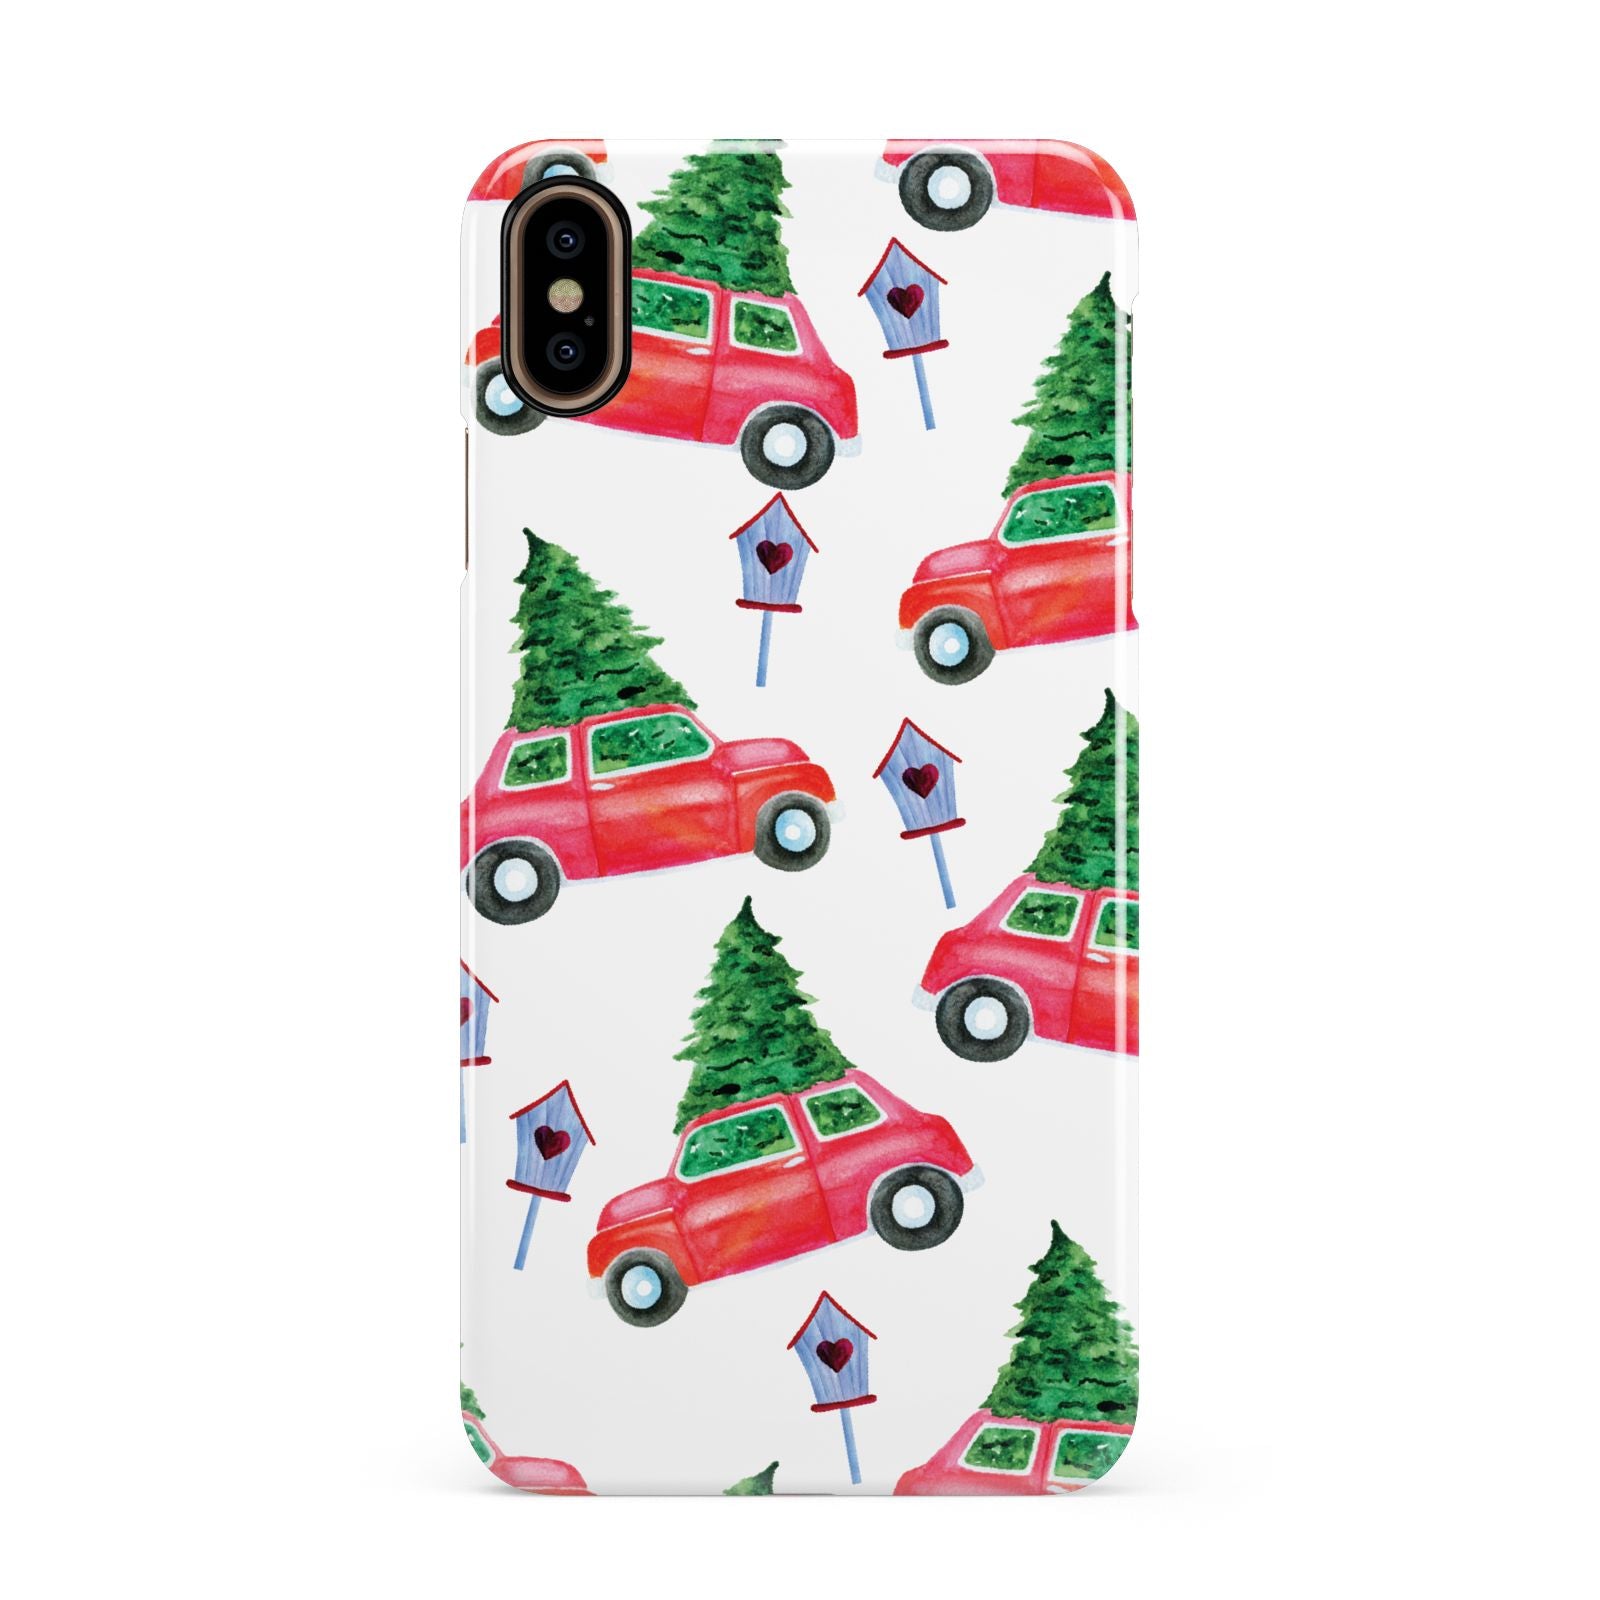 Driving home for Christmas Apple iPhone Xs Max 3D Snap Case